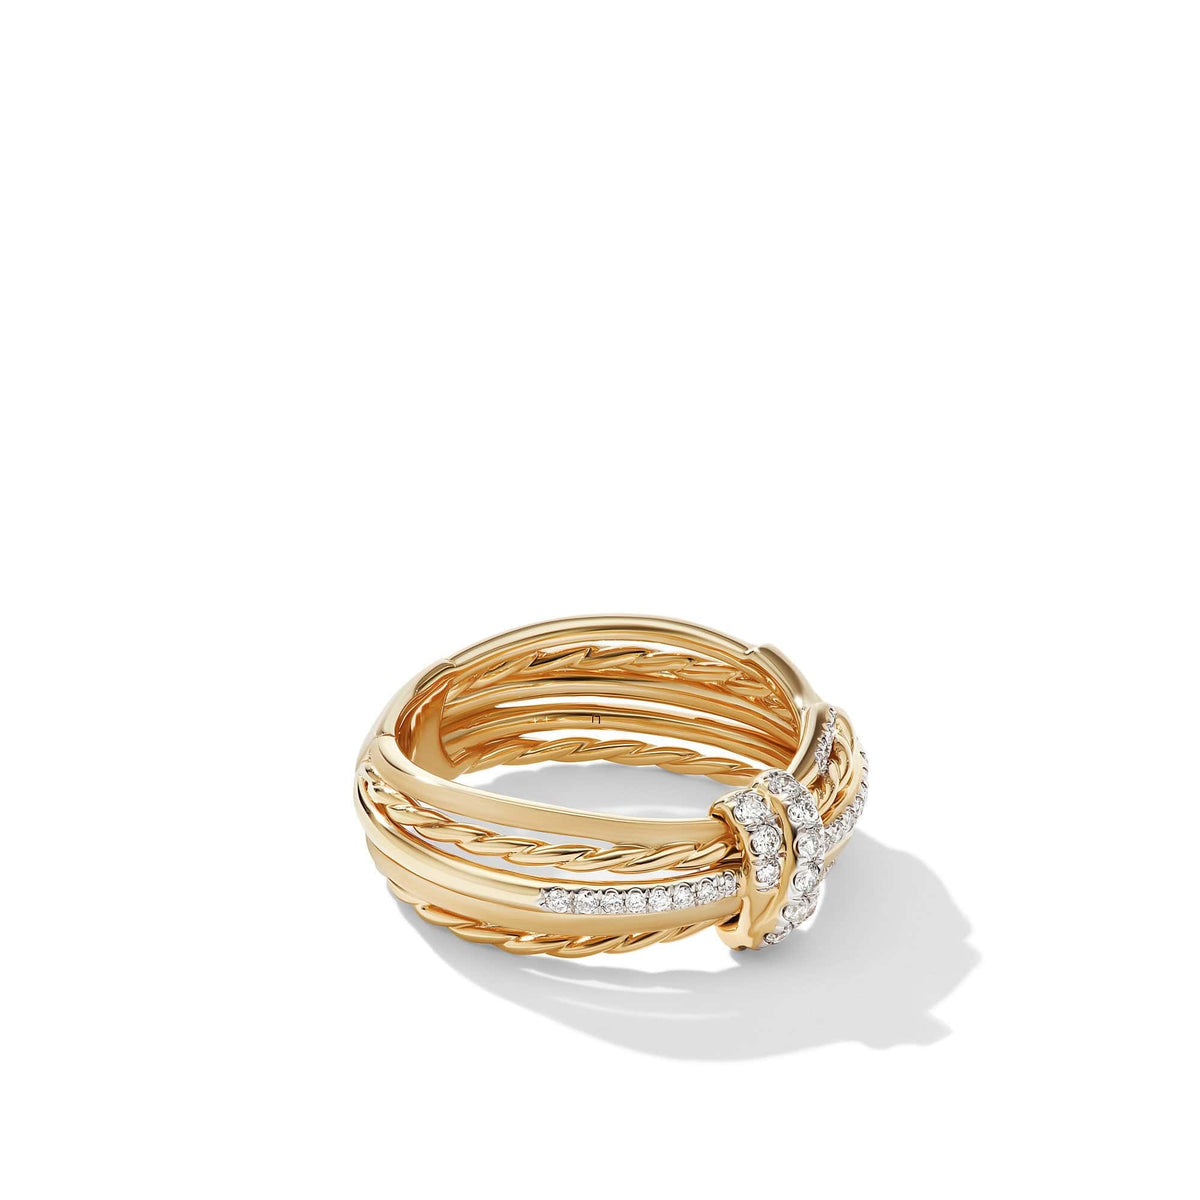 Angelika Ring in 18K Yellow Gold with Pavé Diamonds, Yellow Gold, Long's Jewelers